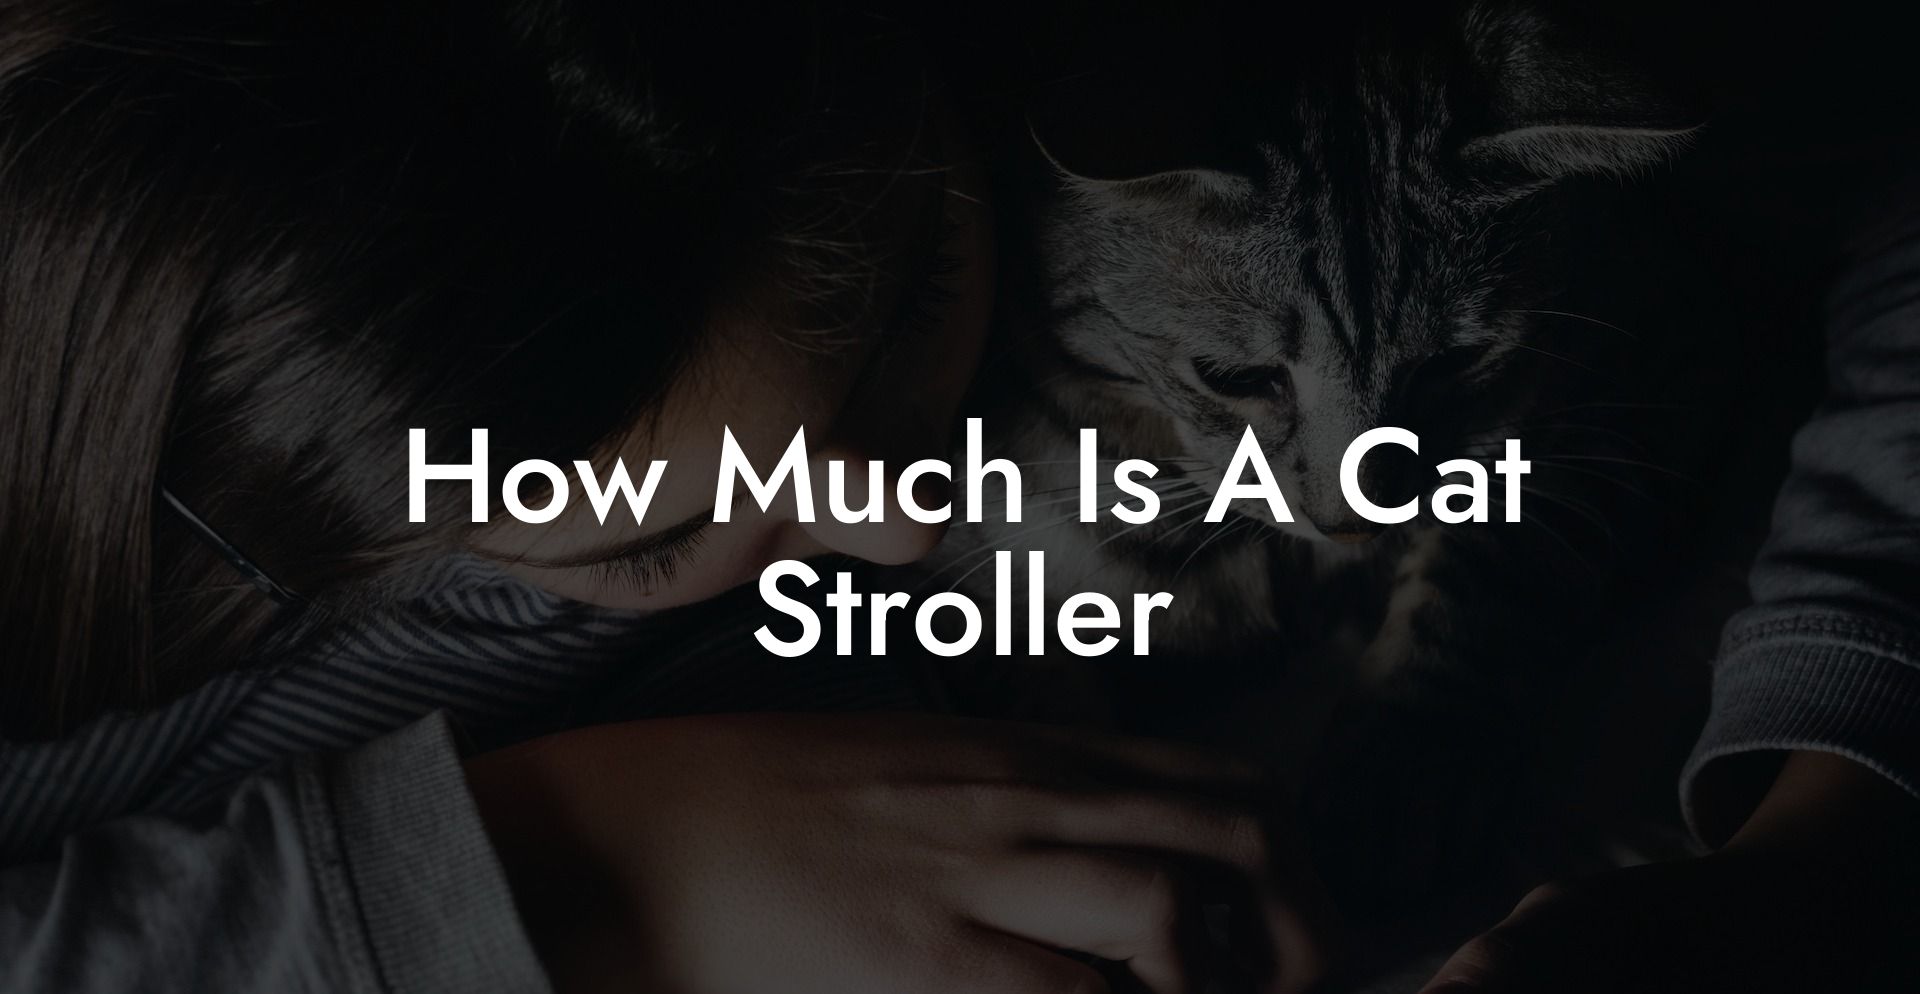 How Much Is A Cat Stroller